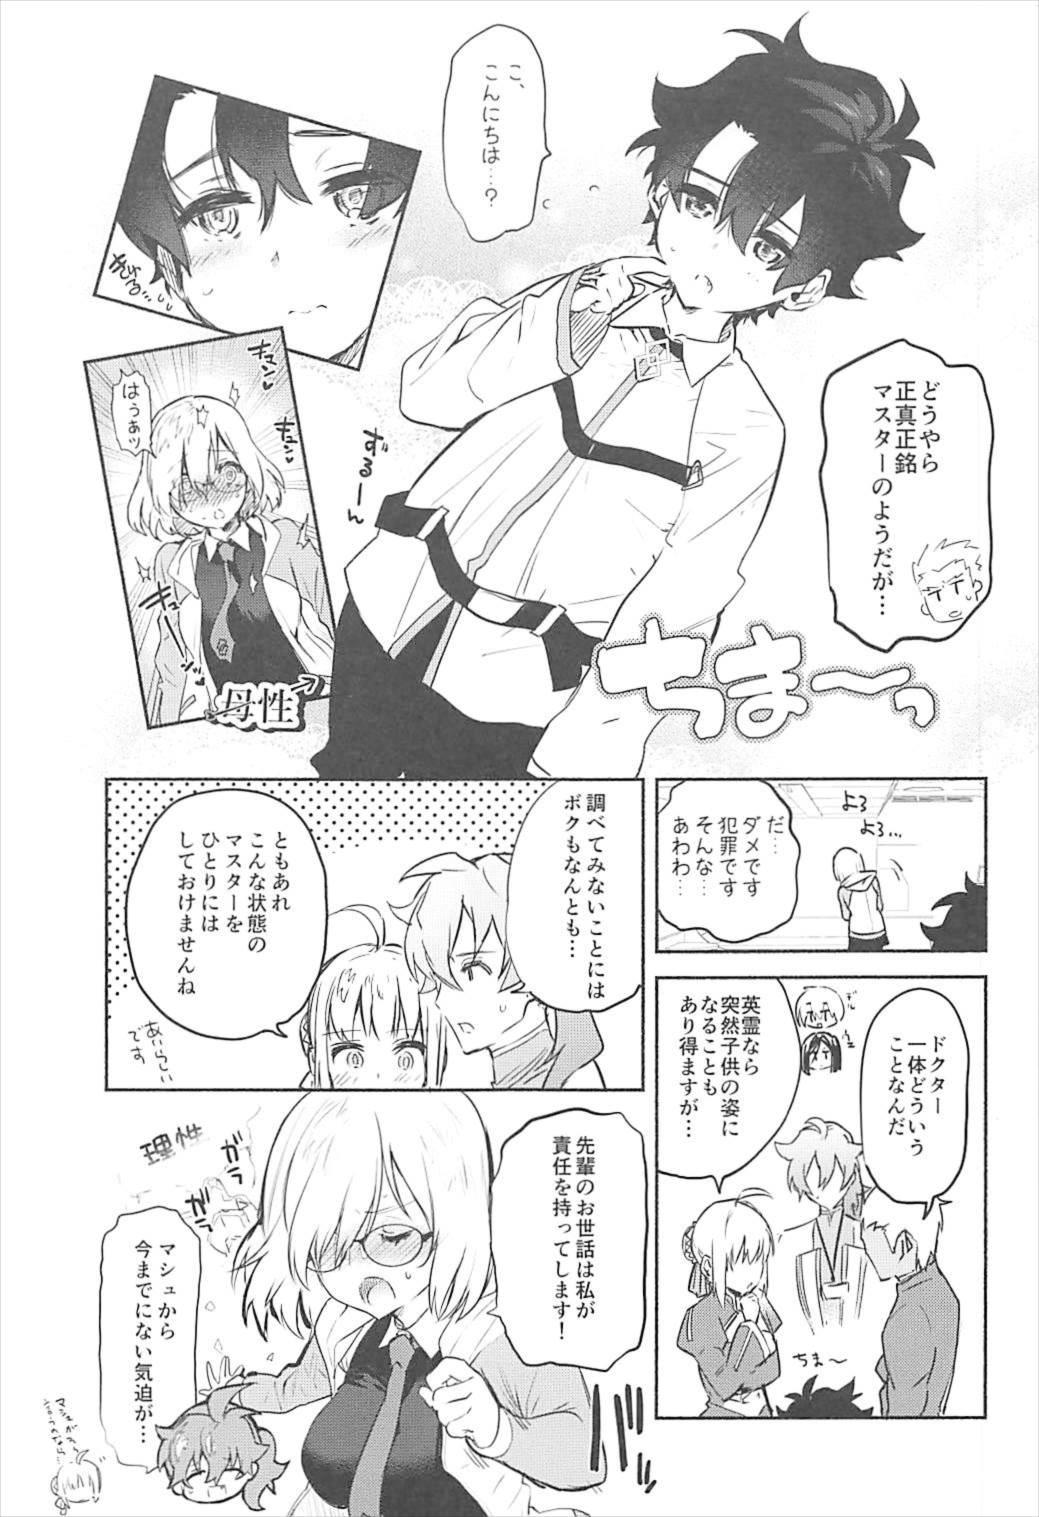 Australian Mash to Issho - Fate grand order Vintage - Page 4